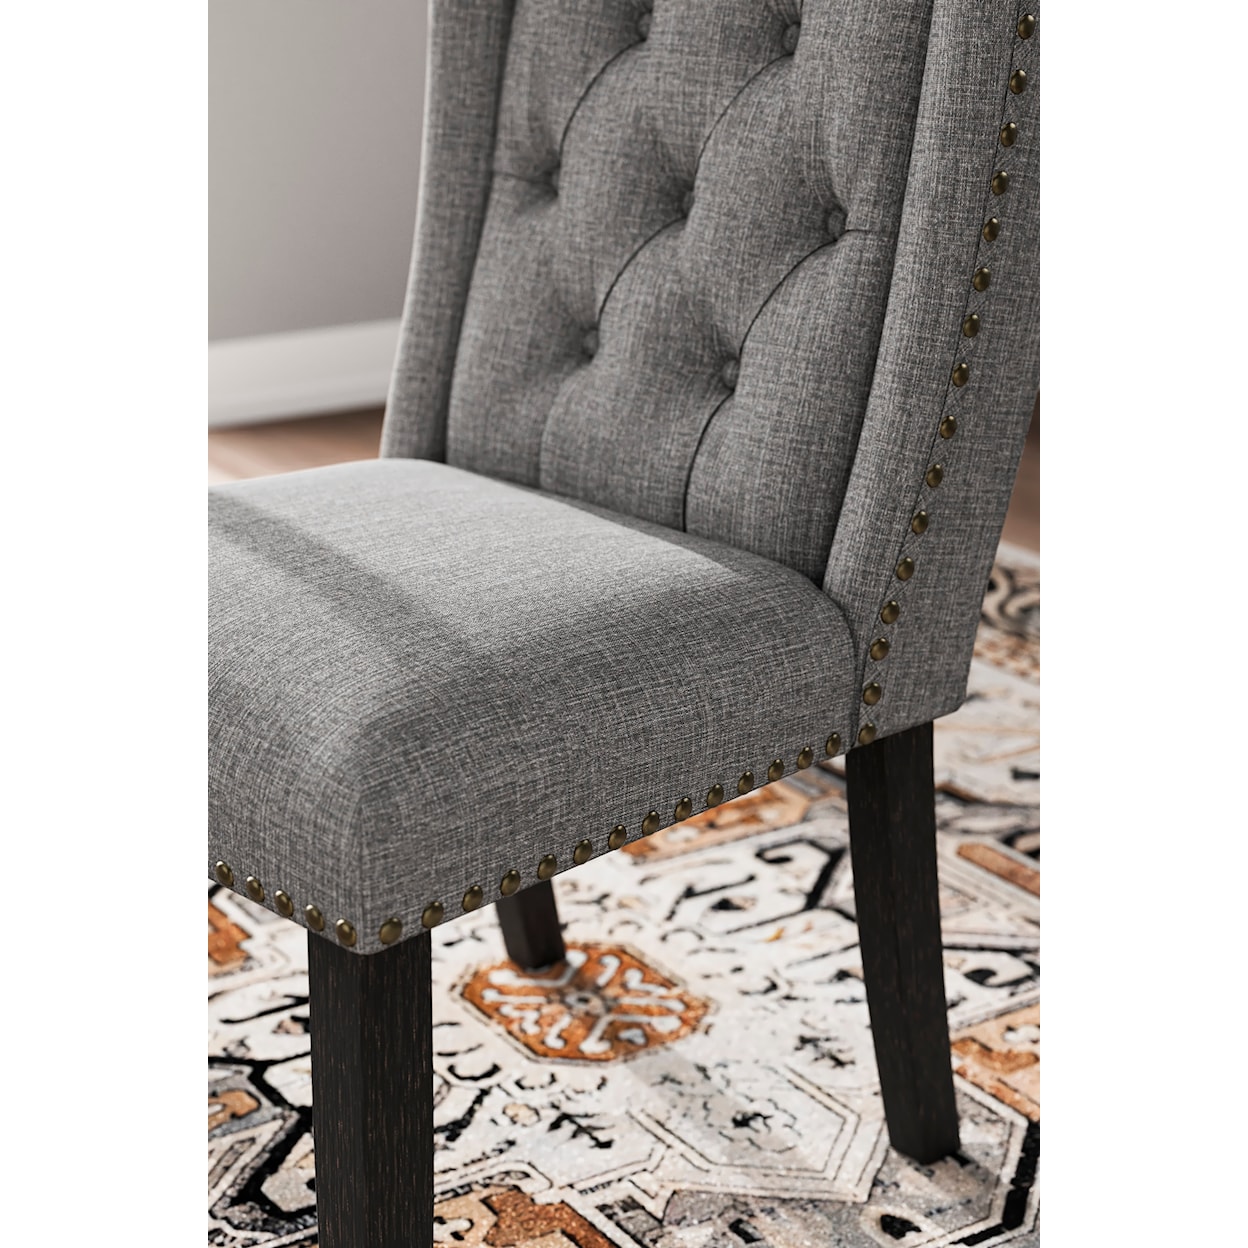 Ashley Furniture Signature Design Jeanette Dining Chair